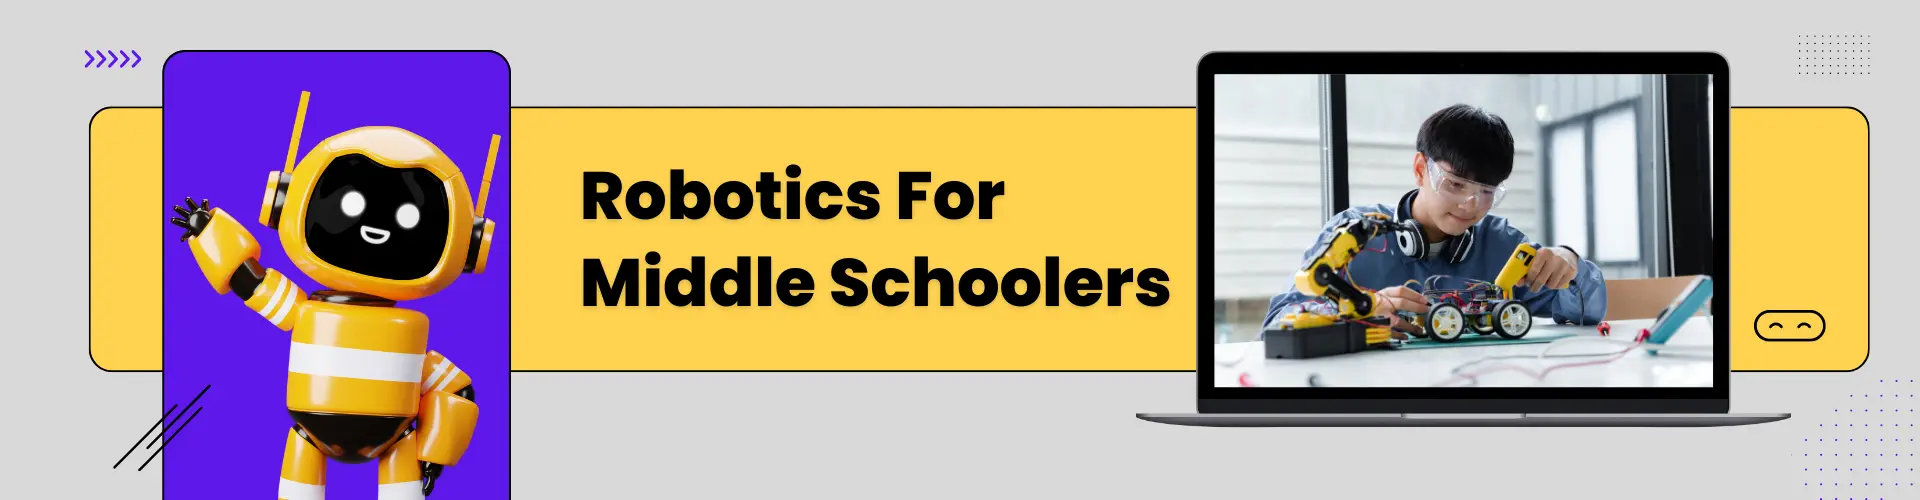 Robotics For Middle Schoolers – Tips And Examples